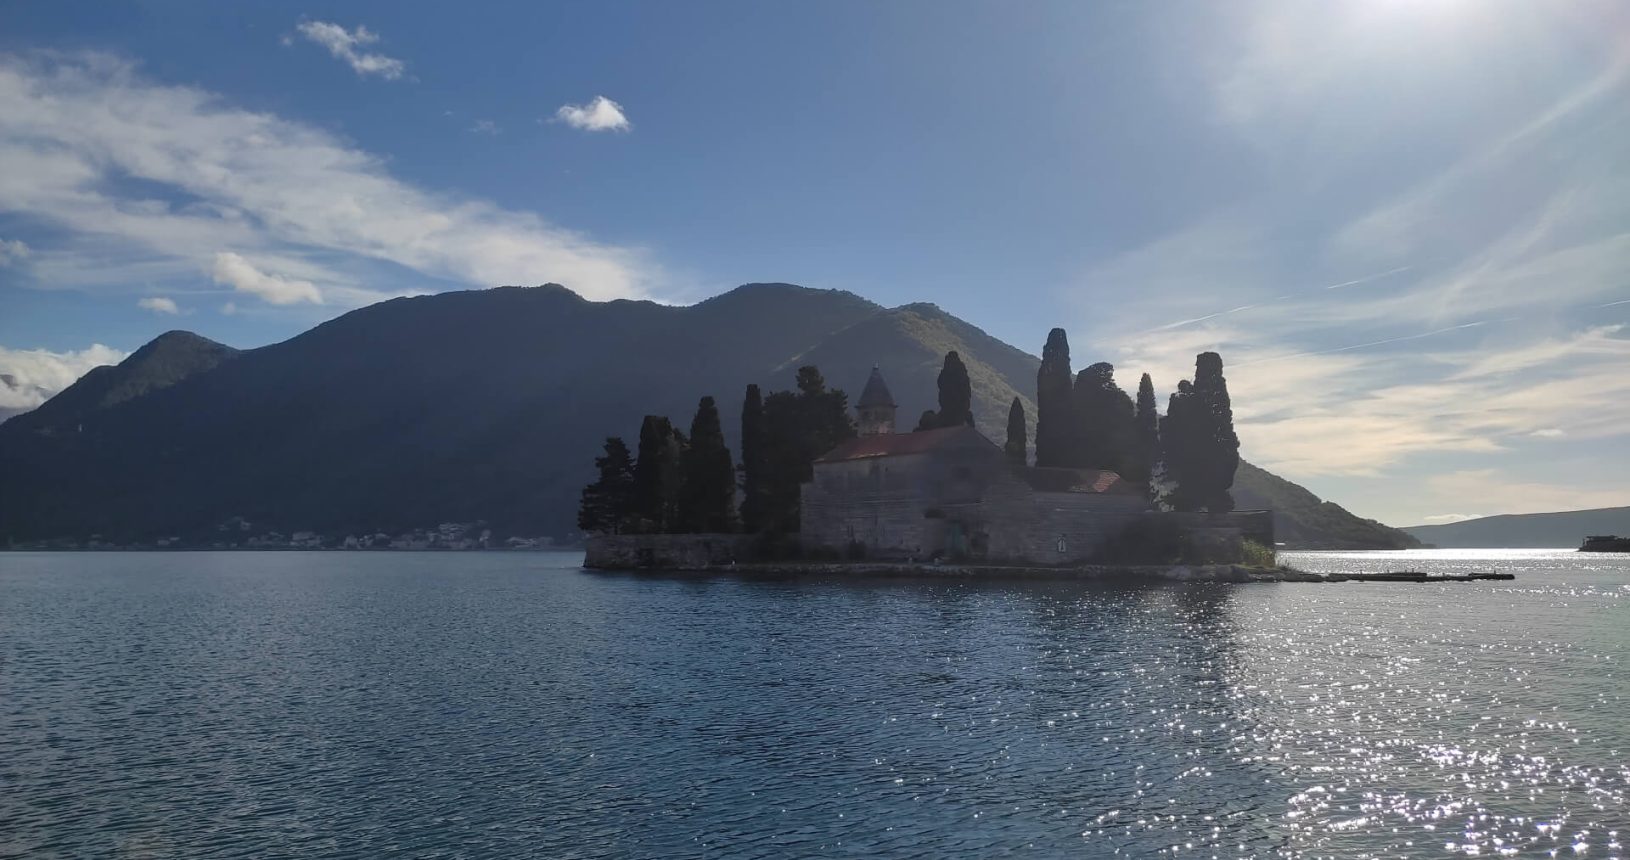 St George Island in the bay of Kotor